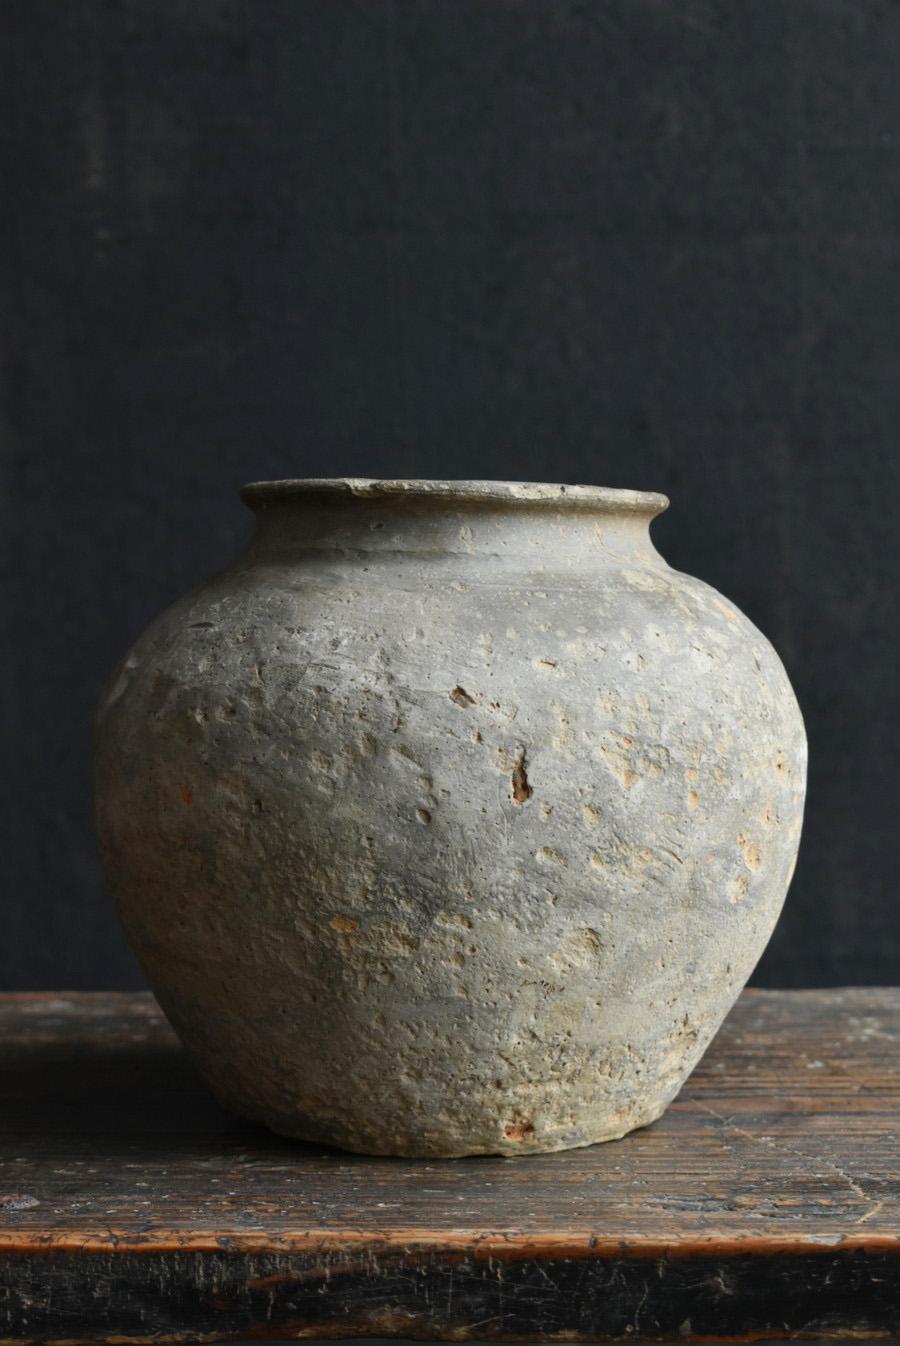 18th Century and Earlier Very Old Excavated Small Pottery Jar from China / Wabi-Sabi Vase / before 9th